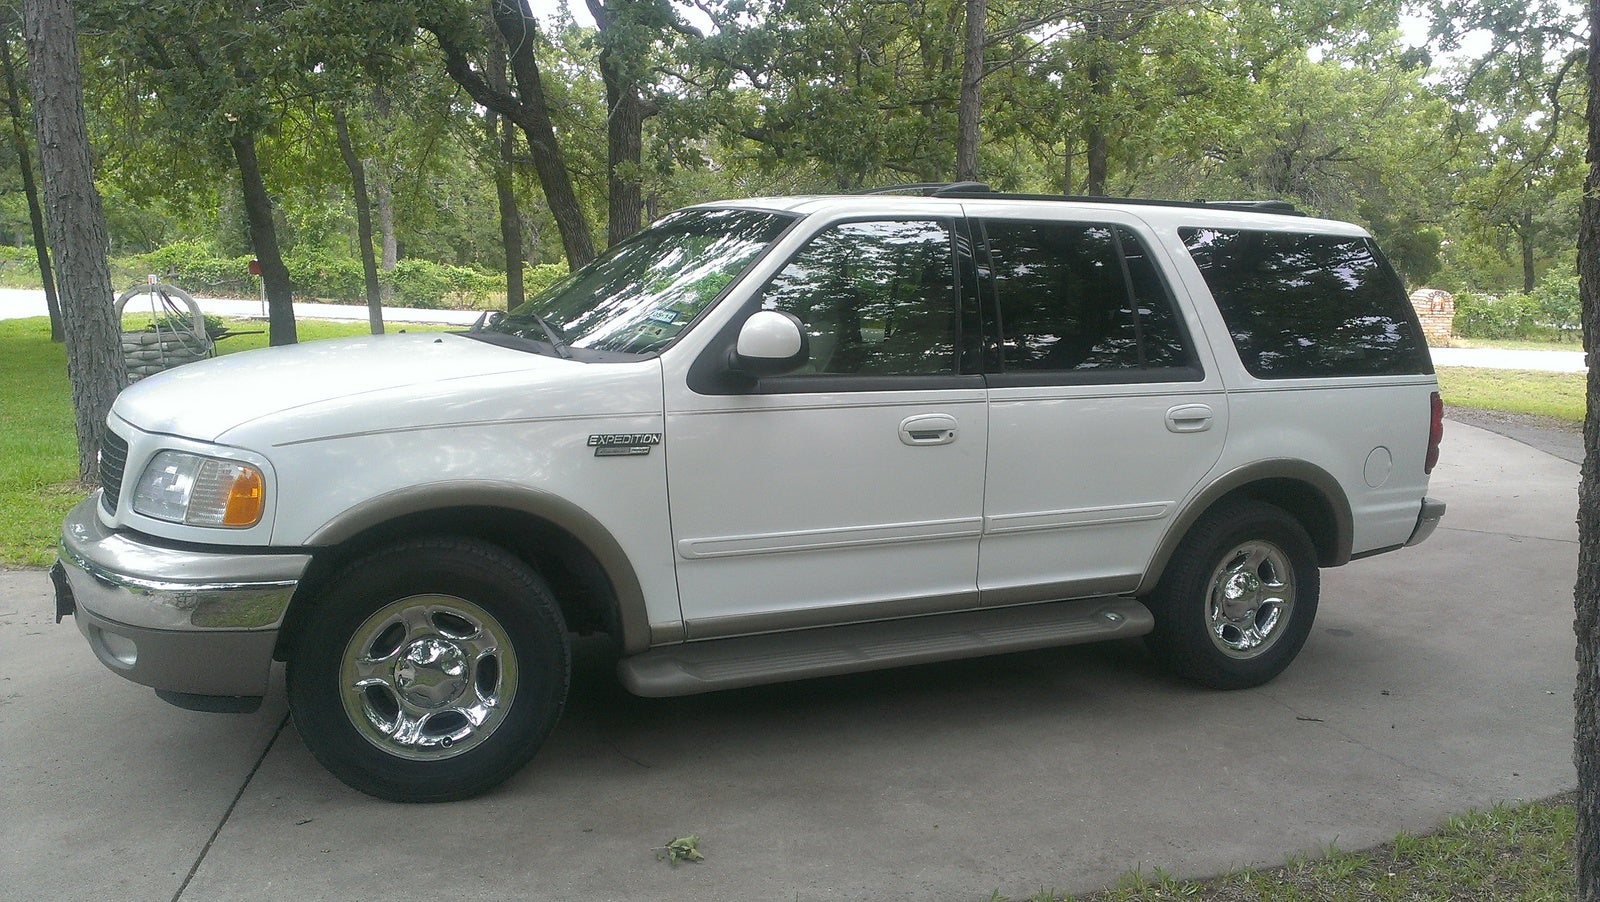 2001 Ford expedition eddie bauer towing capacity